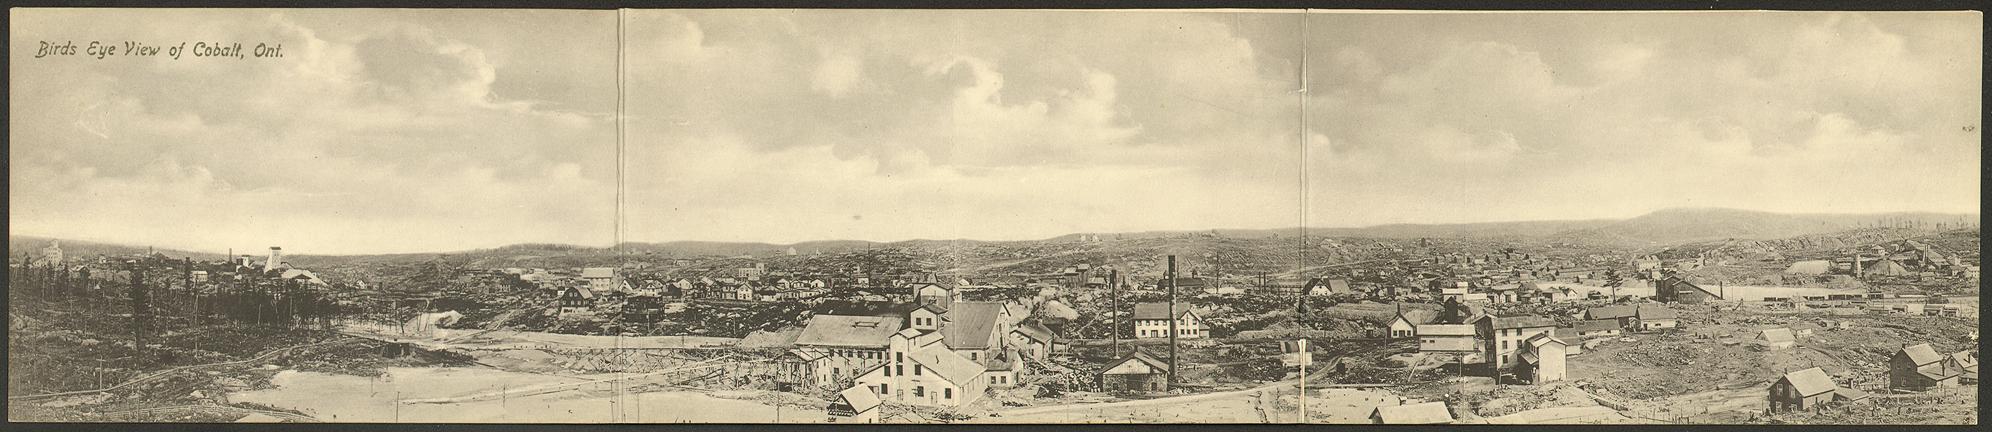 Black and white panoramic view of a large mining town.